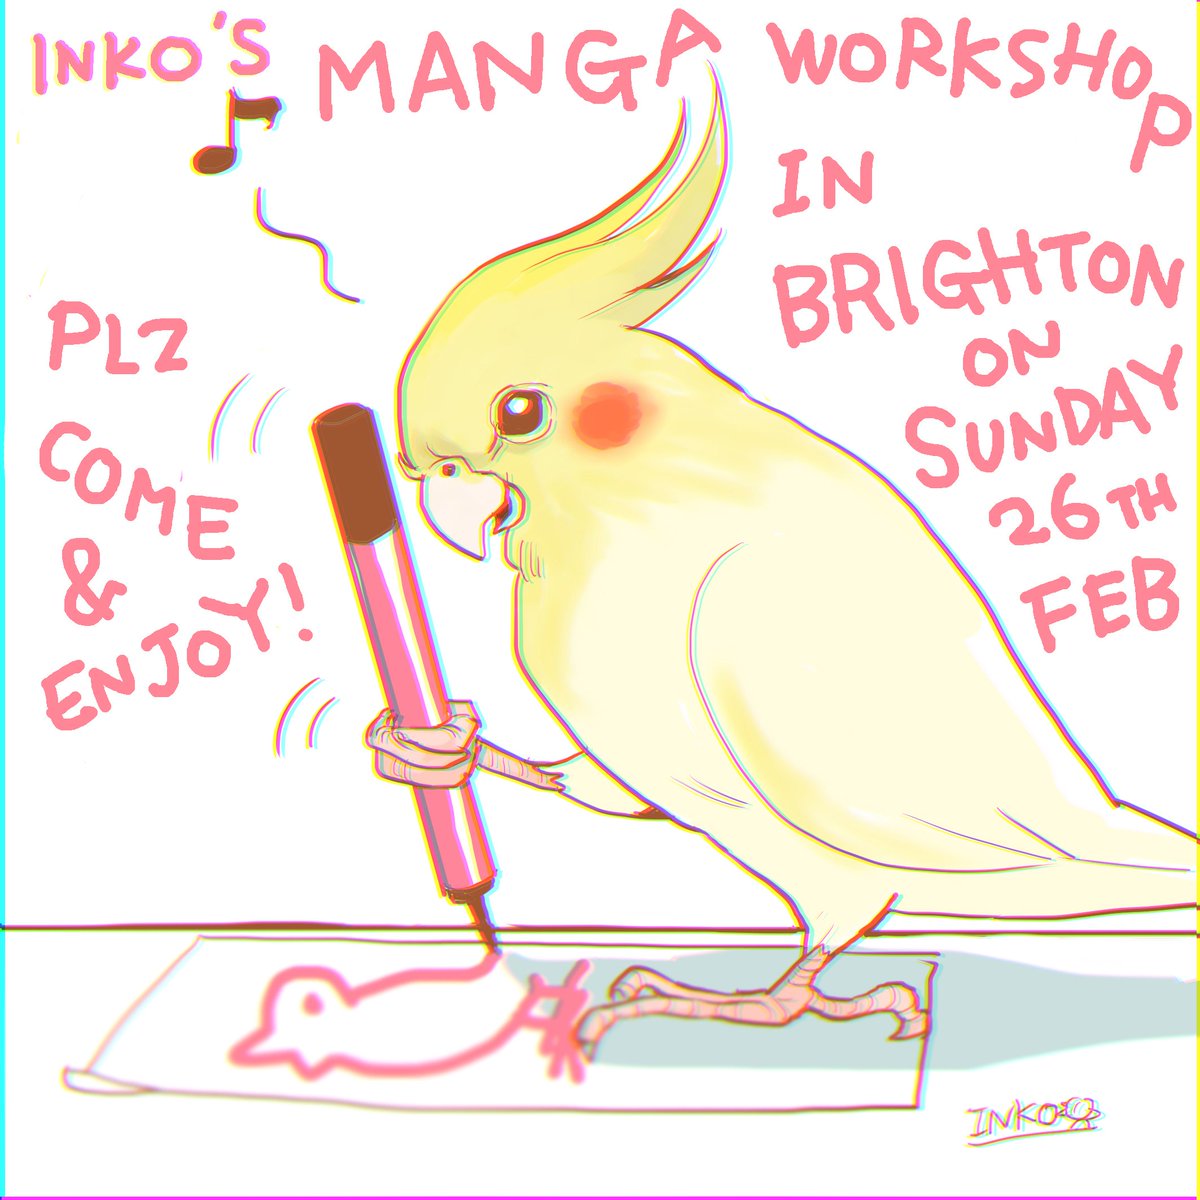 Tomorrow in Brighton! ^ ^ 
You can bring your favourite sketch pad & pencils. Plz book at:
https://t.co/Dr5rEWBdlg 